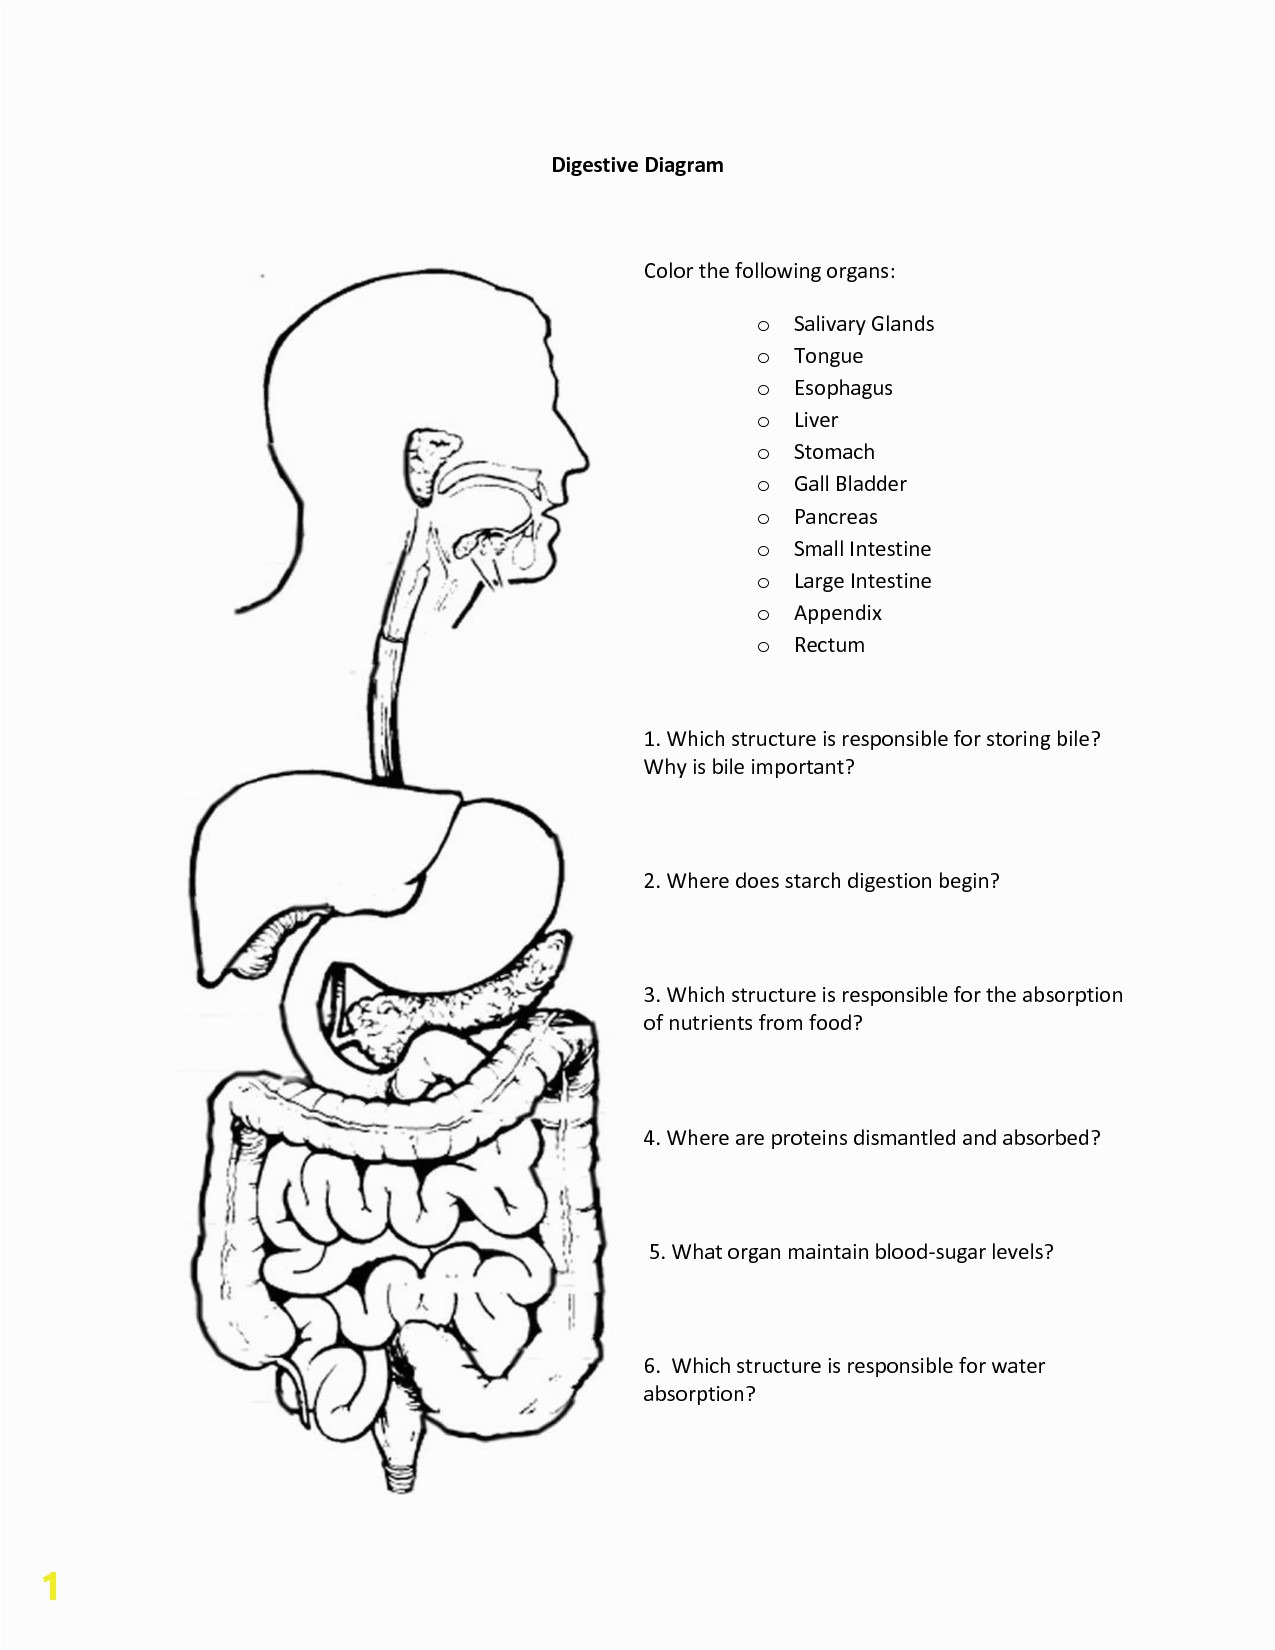 Digestive System for Kids Coloring Pages Digestive System Coloring Page Coloring Home